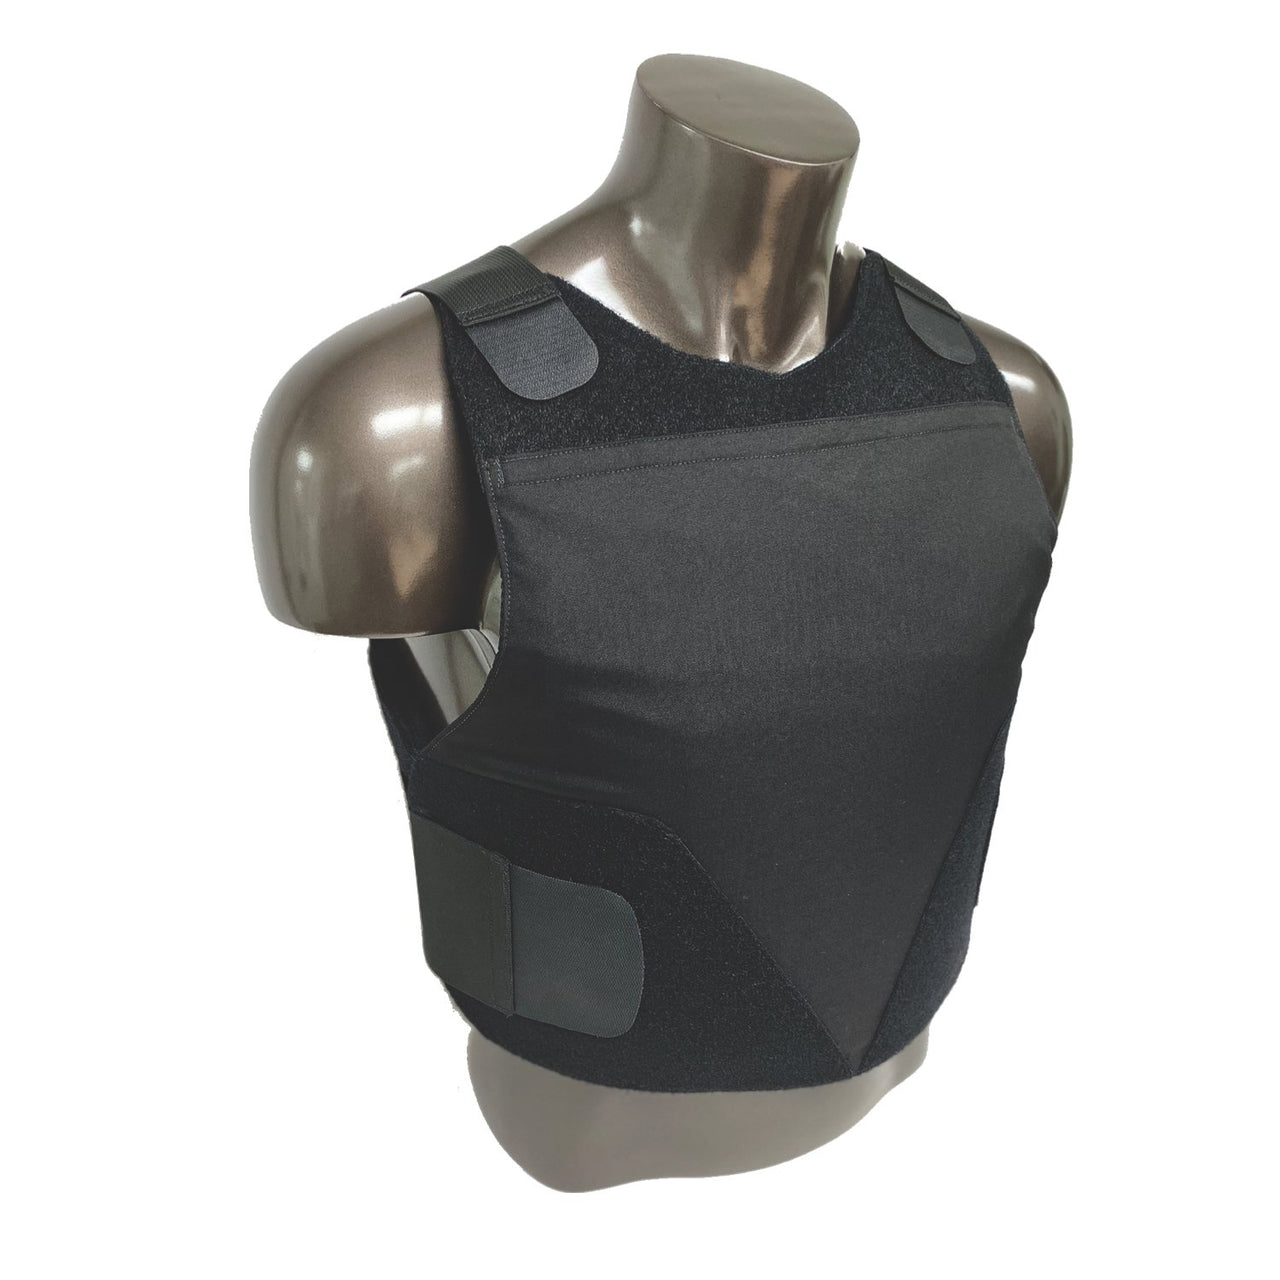 A Body Armor Direct mannequin wearing a black vest.